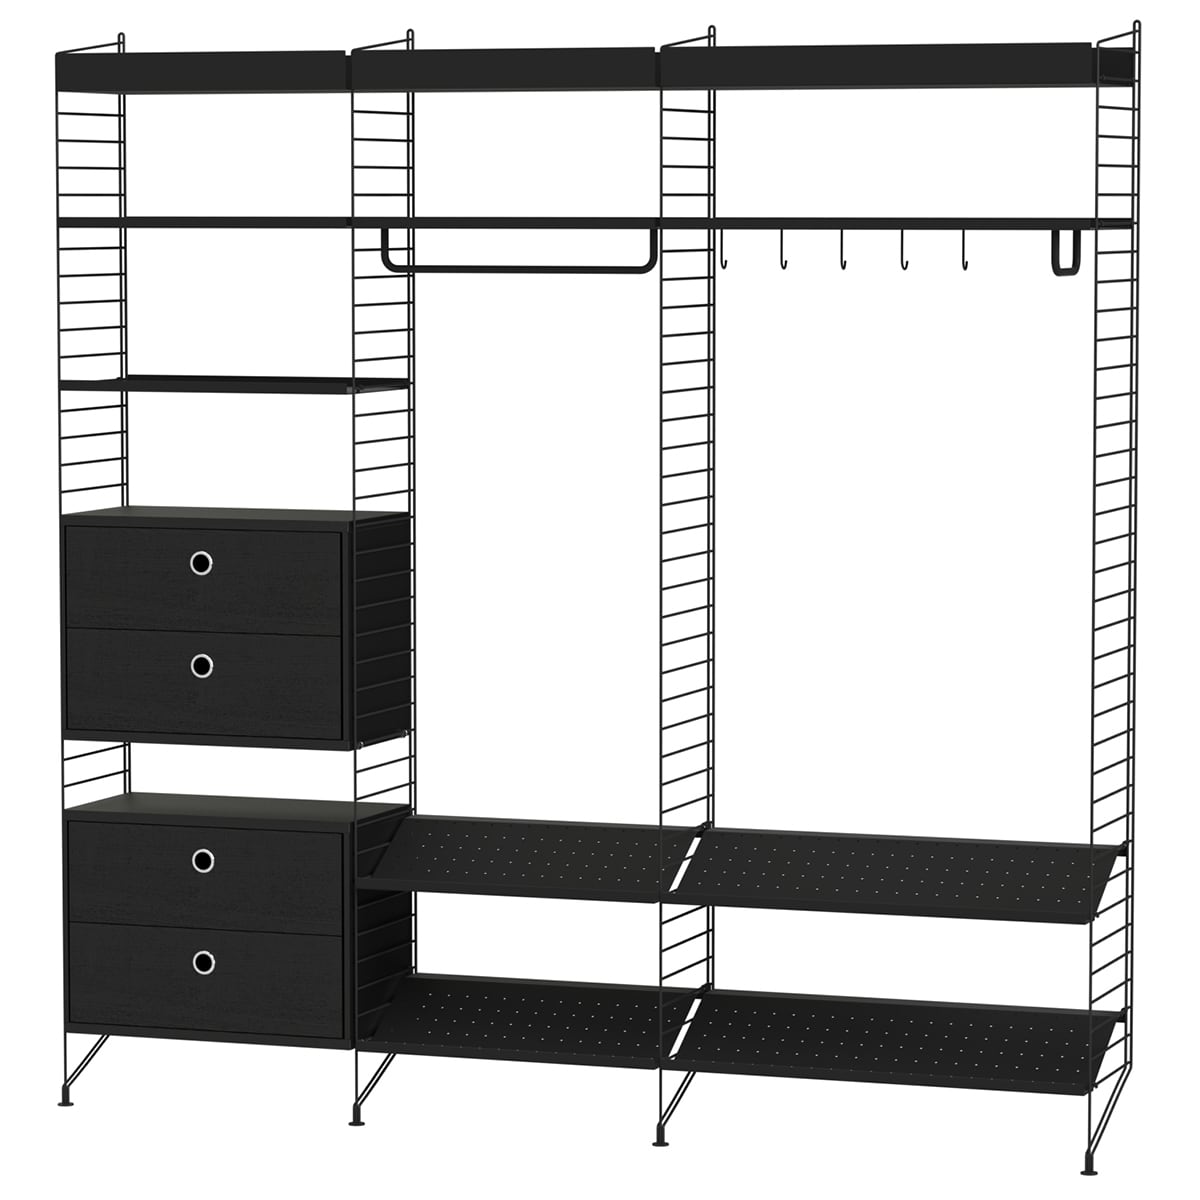 STRING SYSTEM, create your own modular storage system, from A to Z - Original...